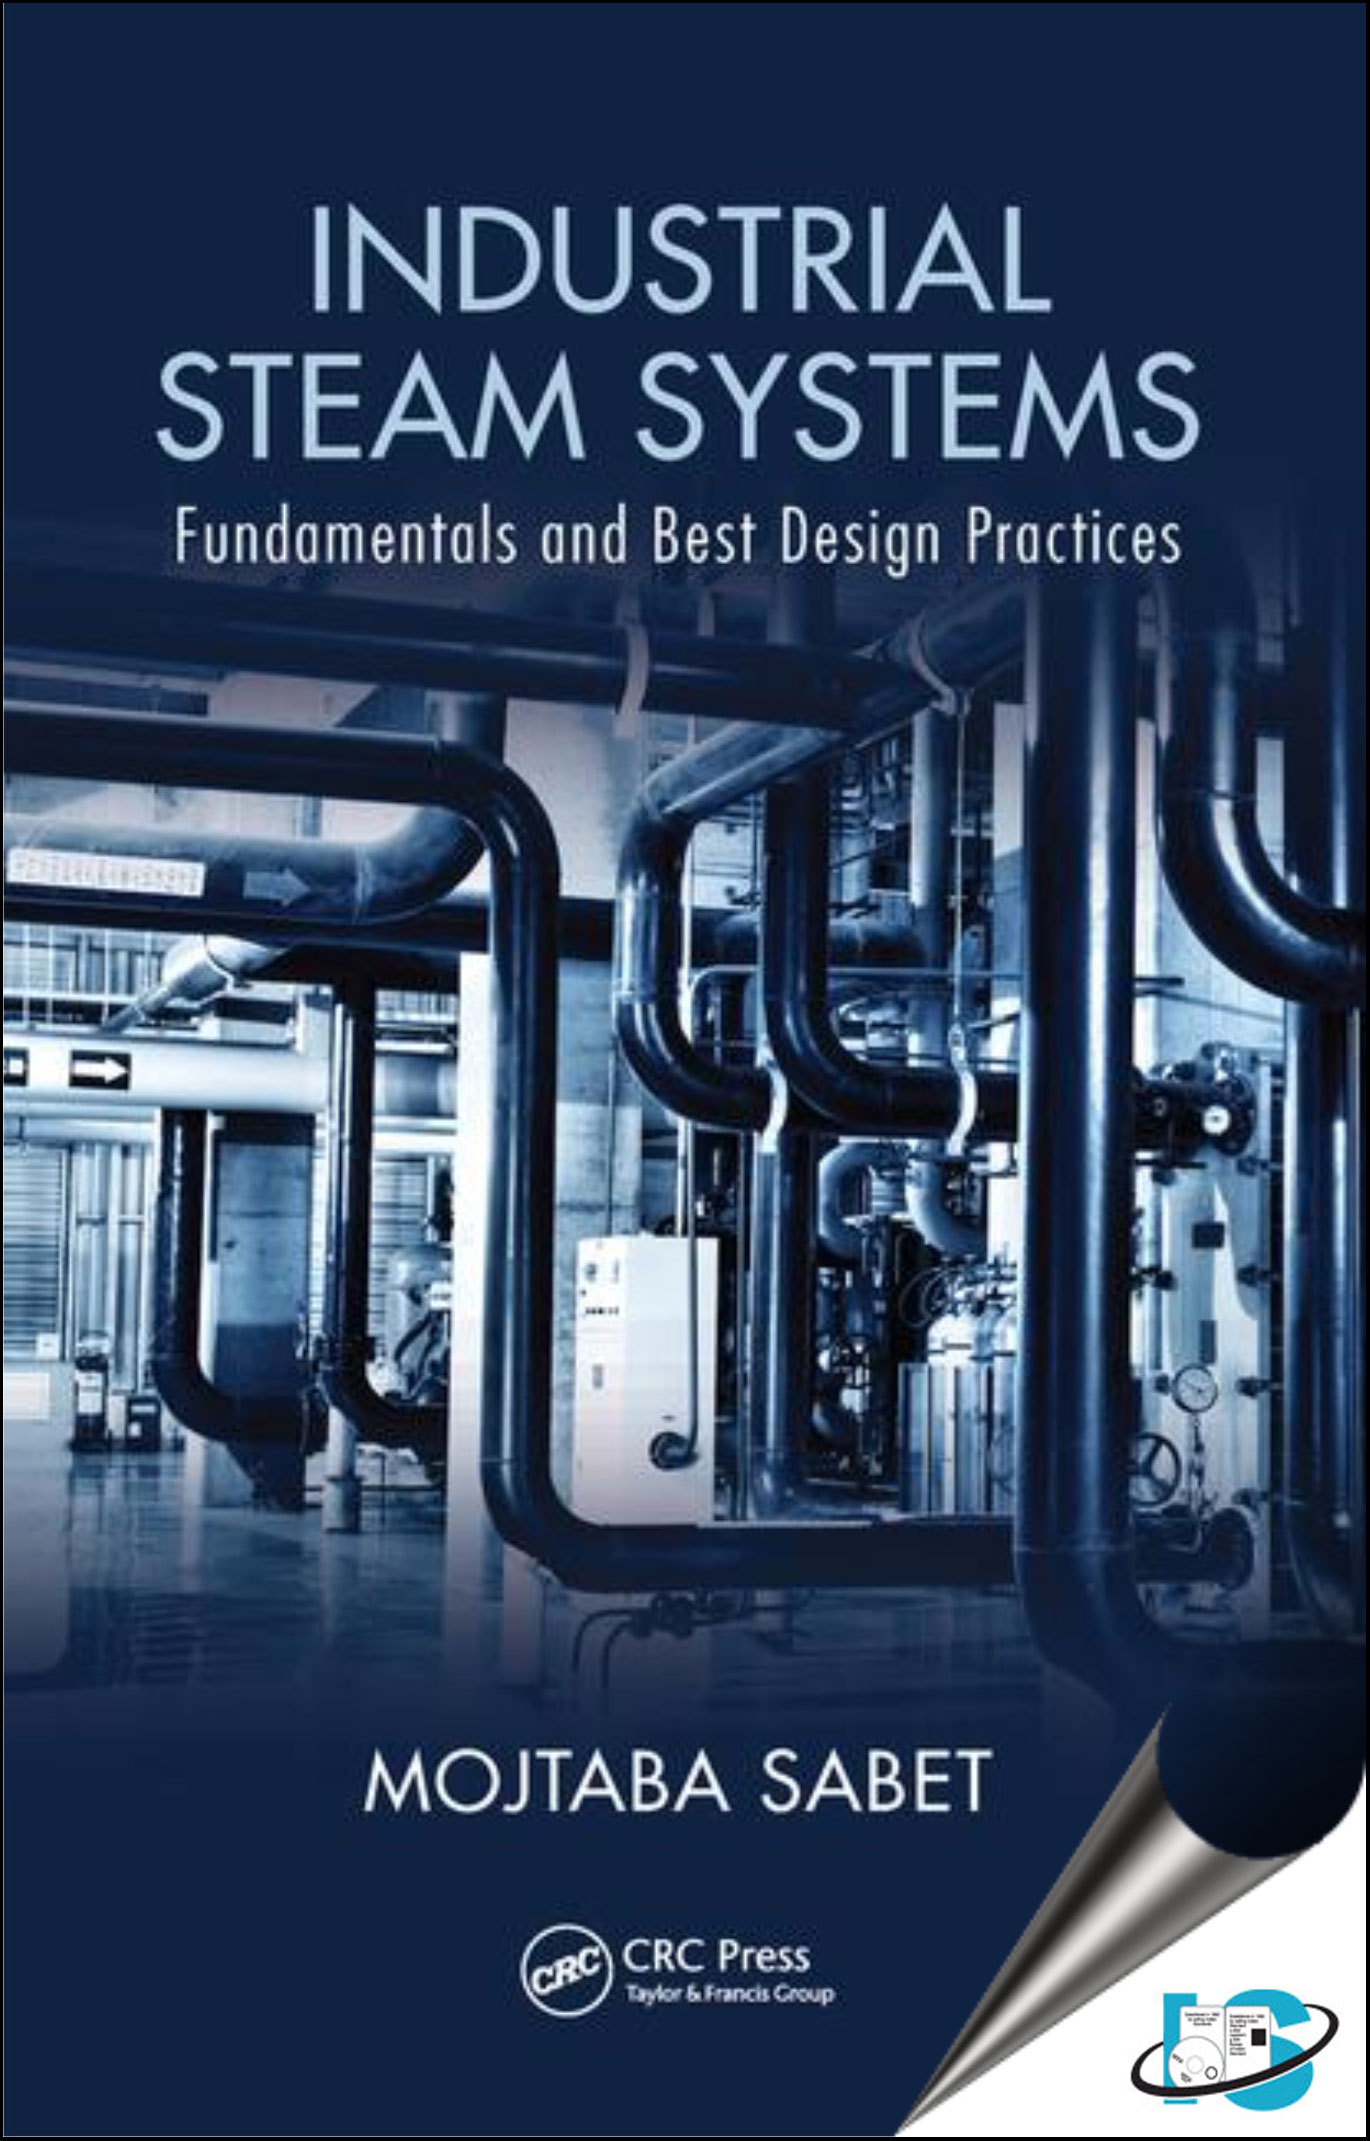 Post Industrial Society. Fundamentals of Agricultural Engineering books. Steam systems